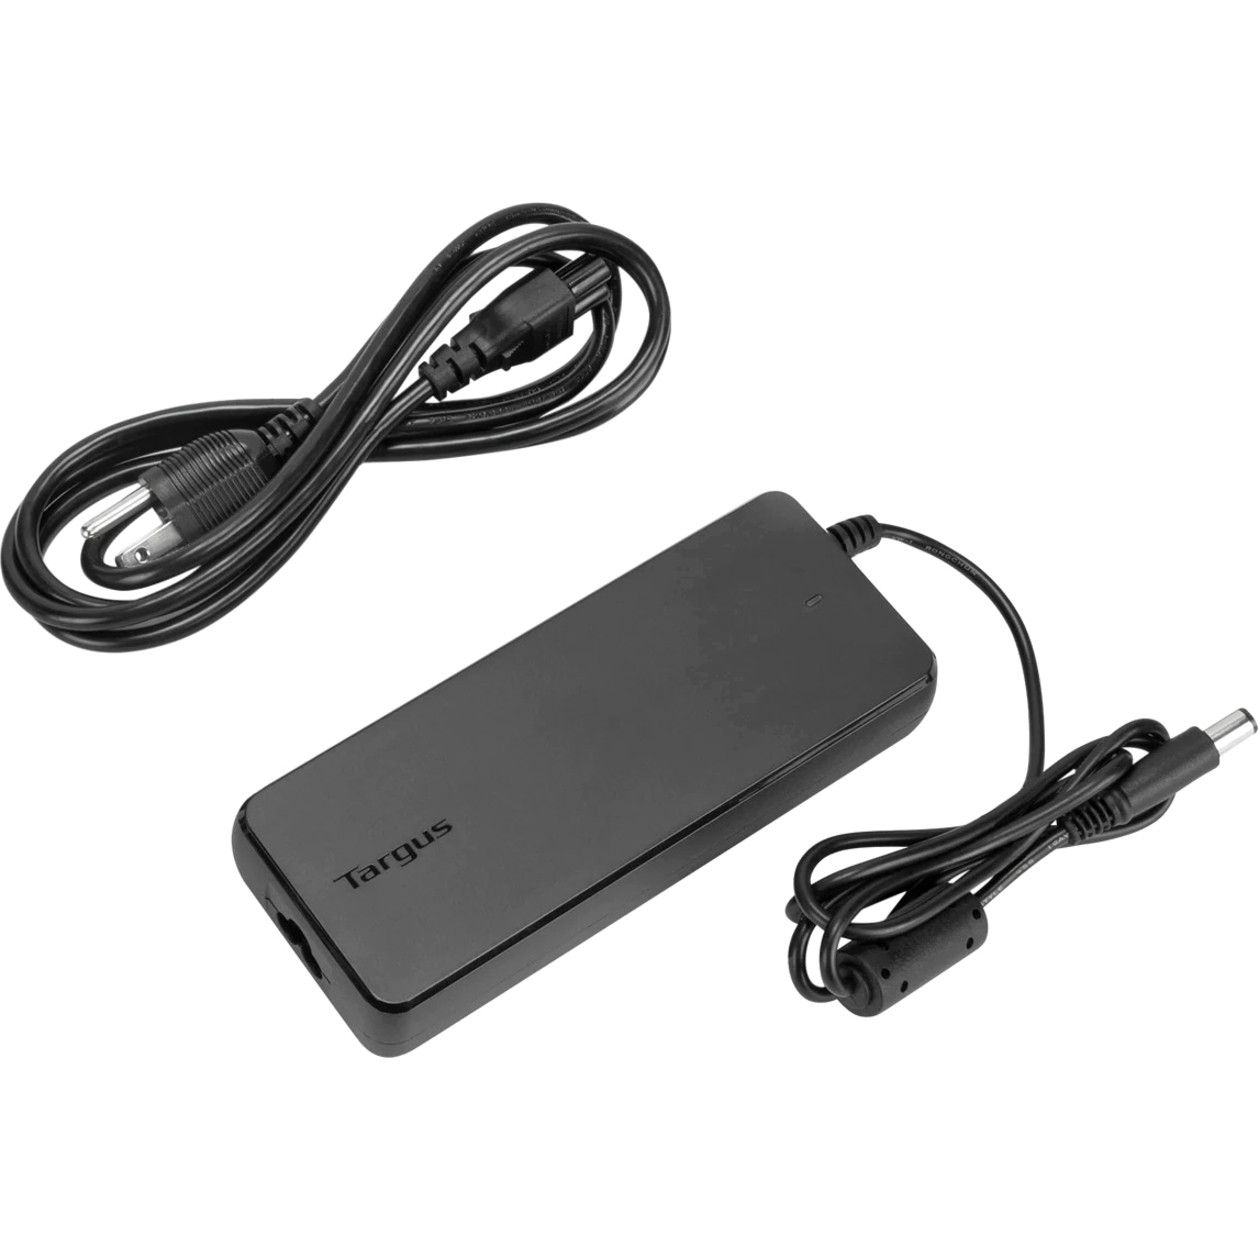 Targus AC/DC Adapter and AC Cable Cord Bundle for DOCK1901 Pack150 W7.31 A OutputBlack BUS0415